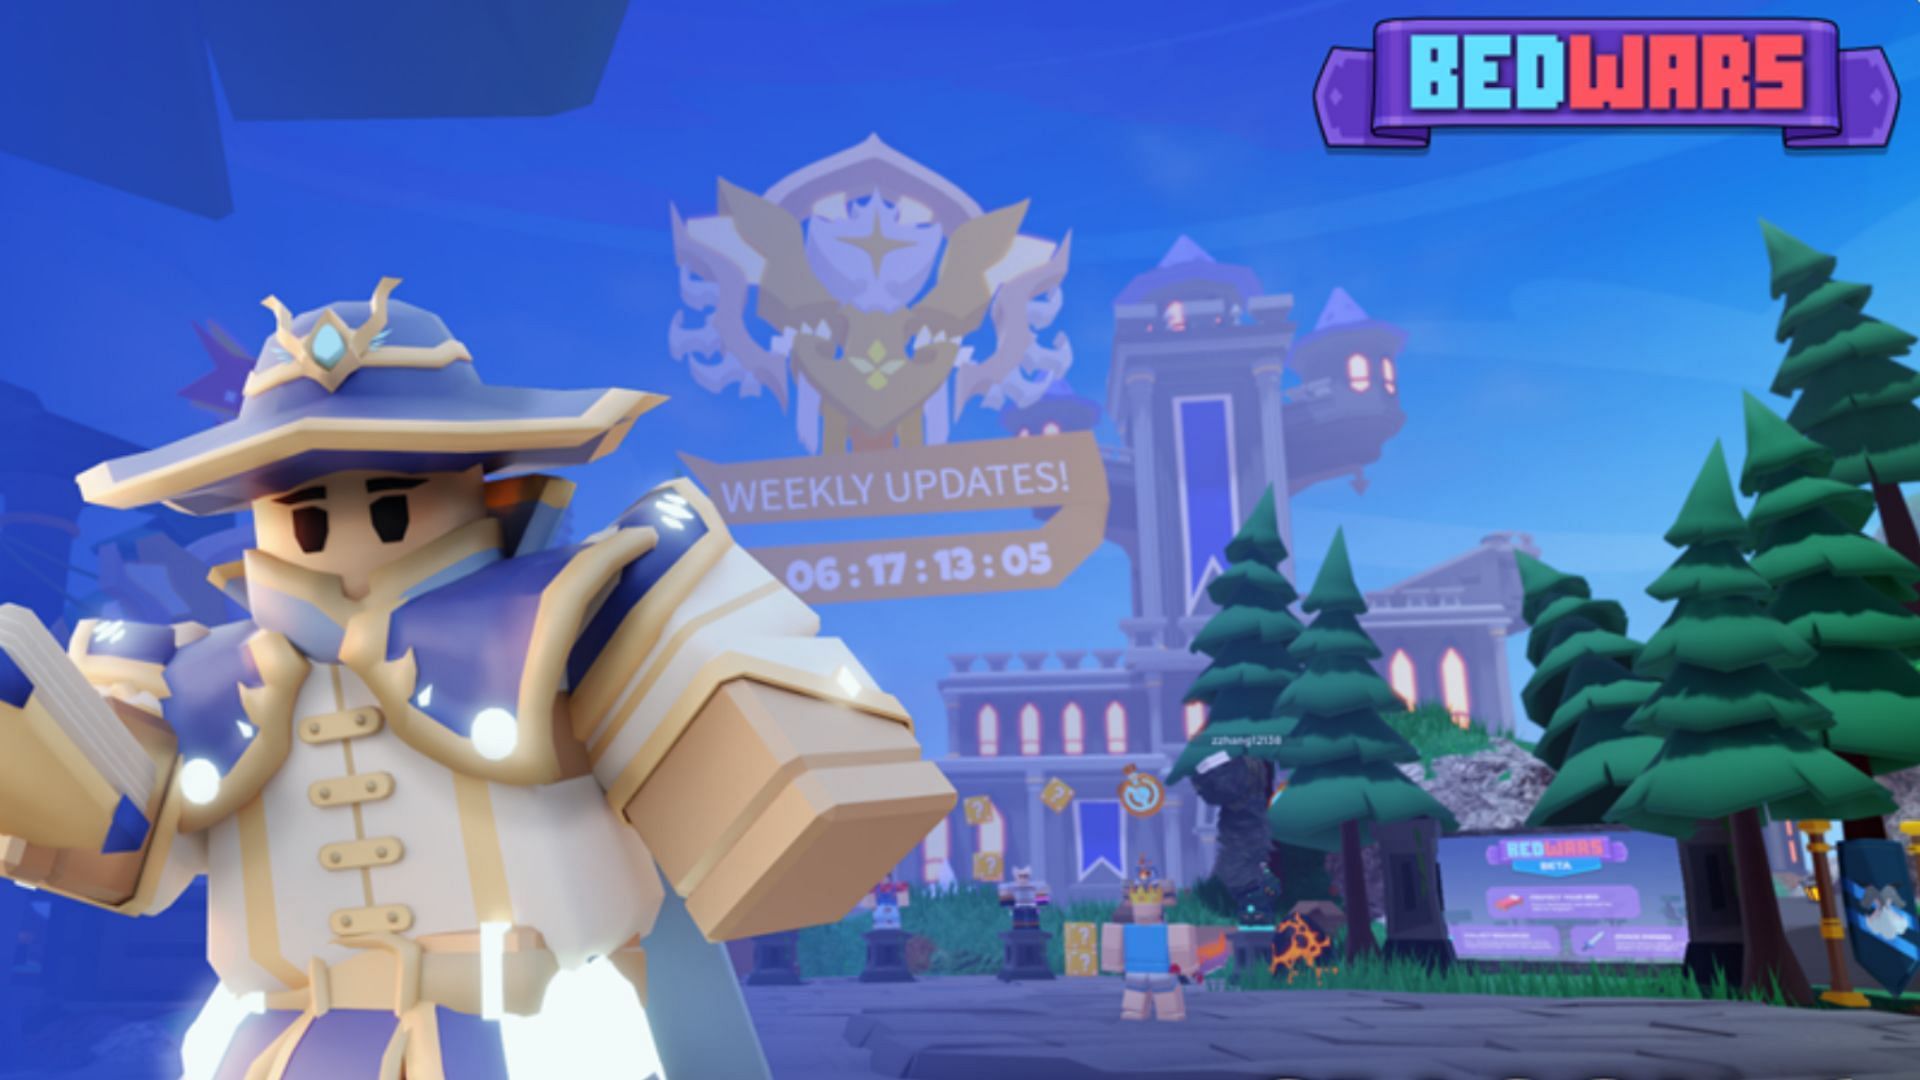 All about BedWars (Image via Roblox)